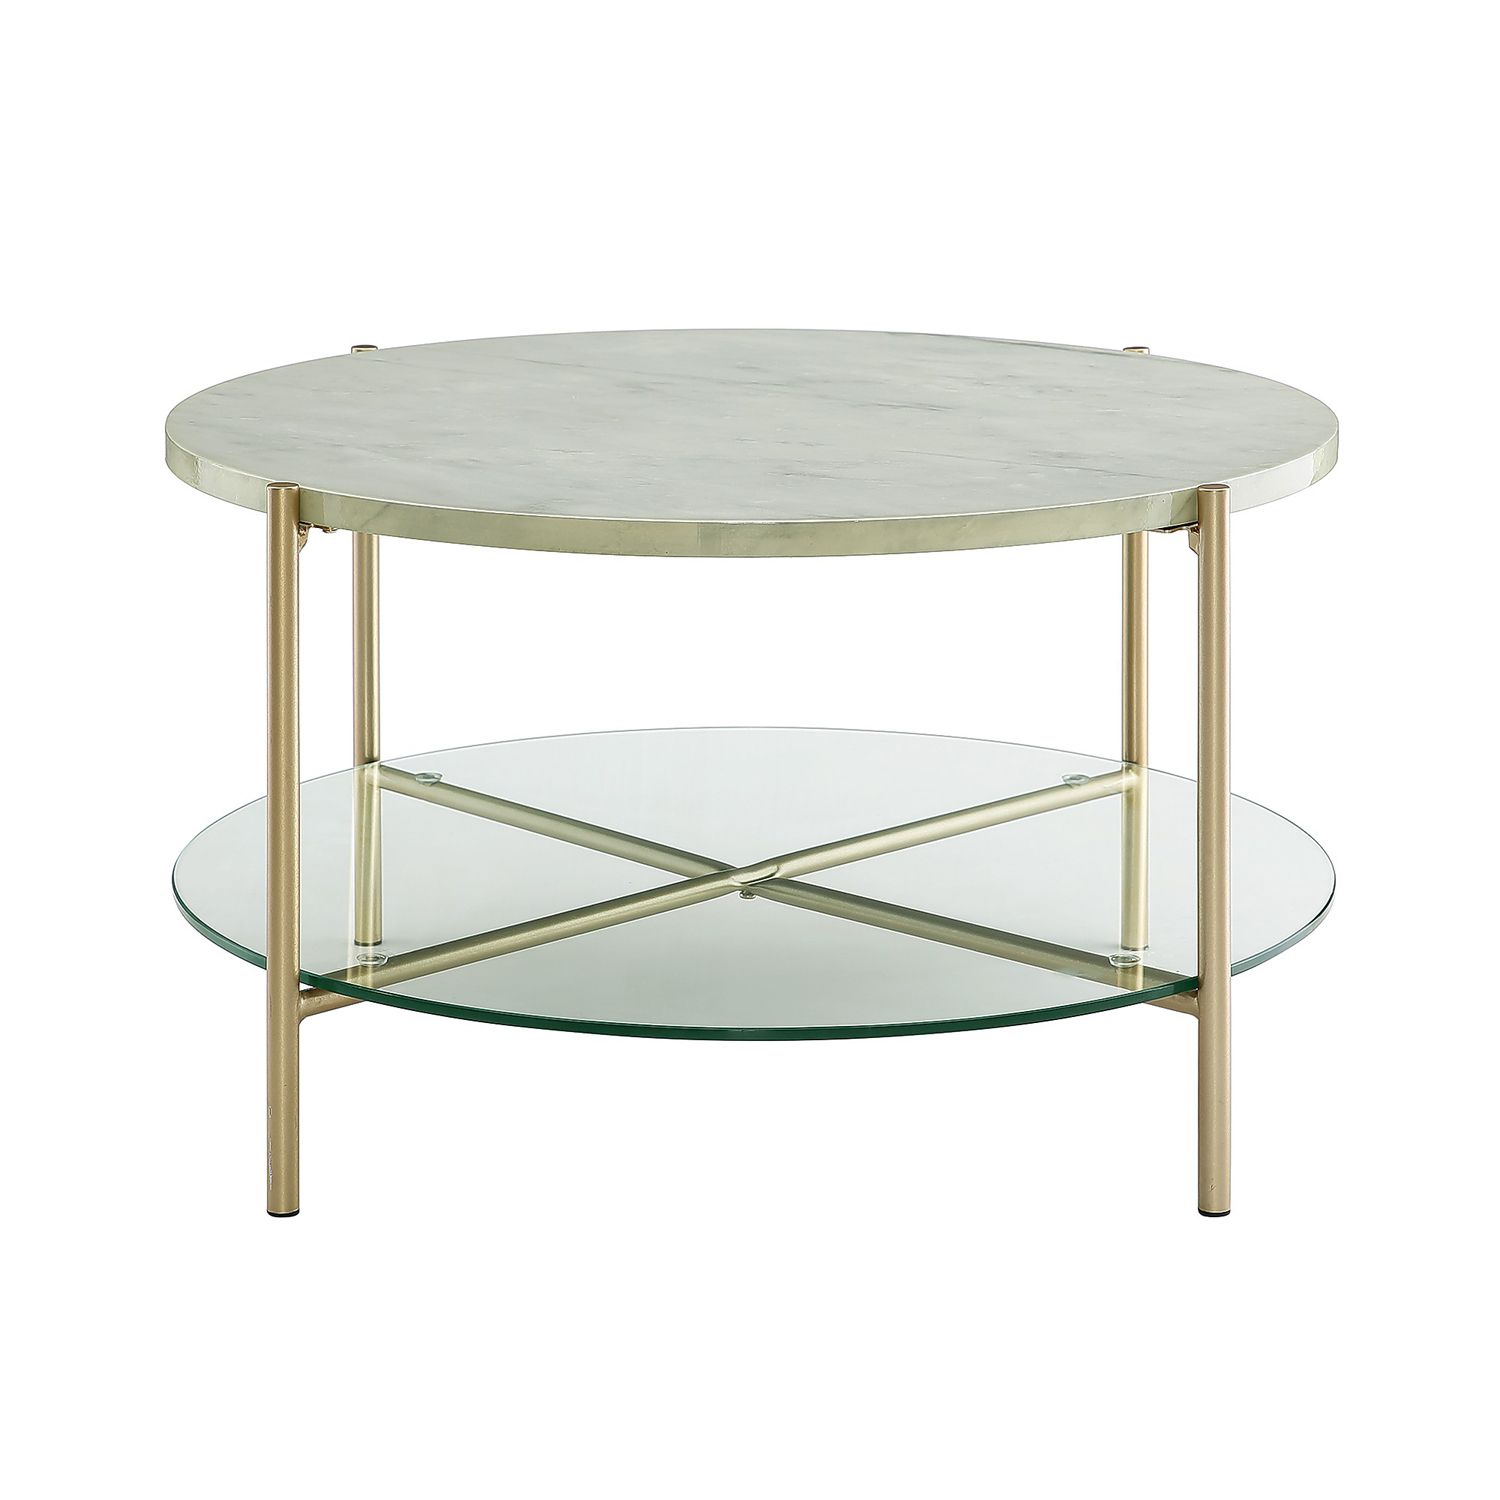 Faux Marble Round Coffee Table – Pier1 With Modern Round Faux Marble Coffee Tables (View 19 of 20)